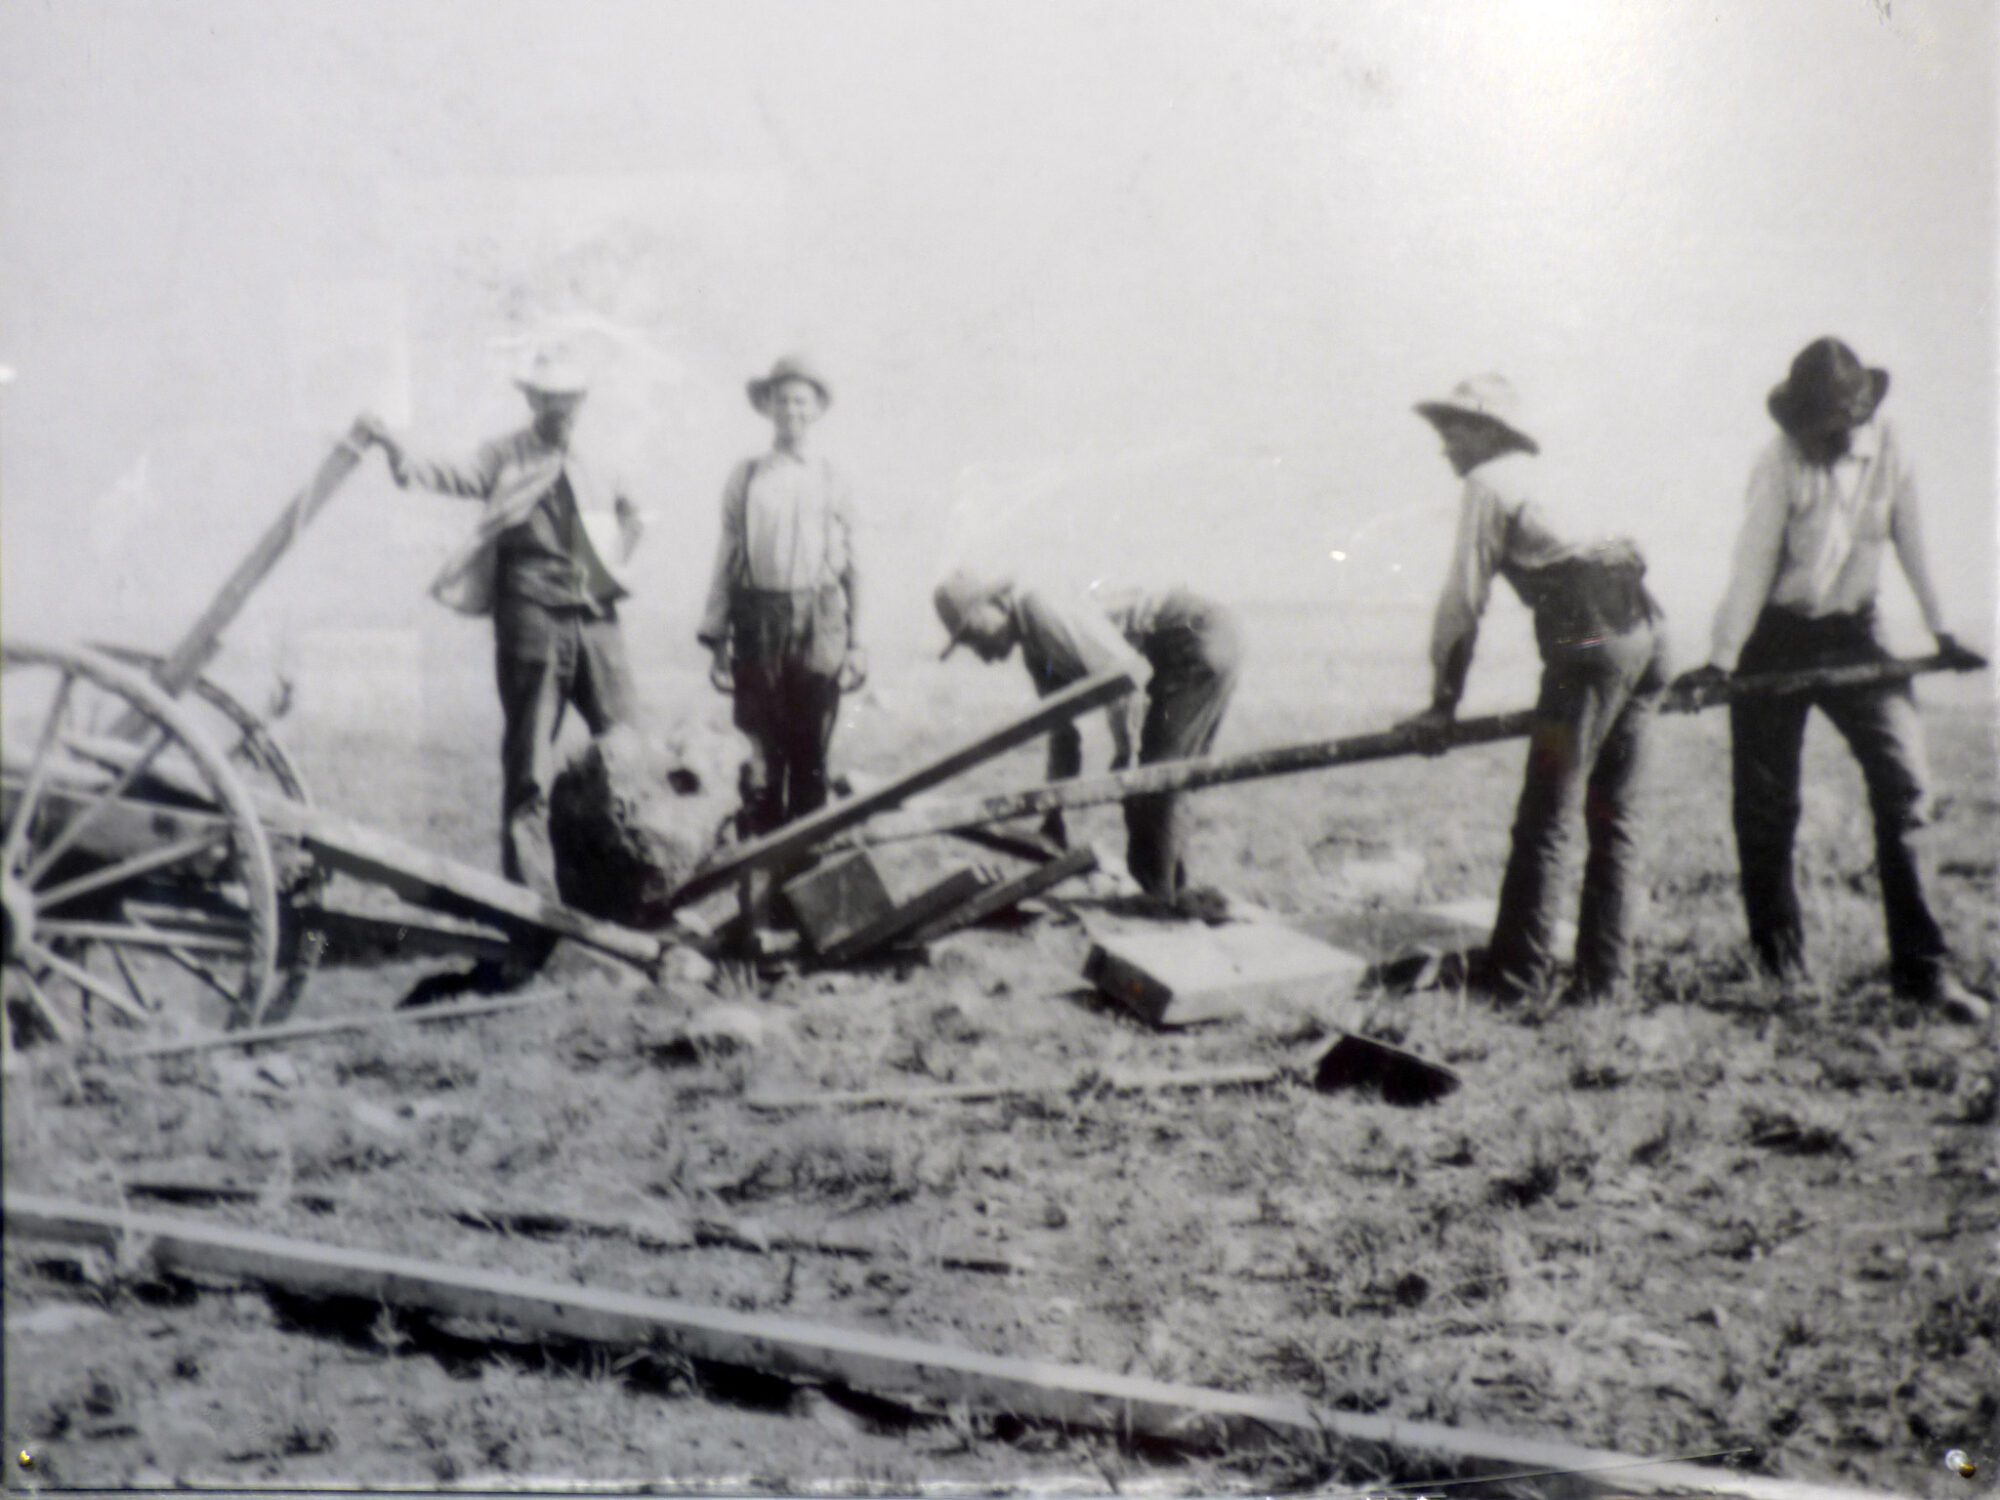 Daniel Moreau Barringer and follow workers digging up the meteorite and loading it on a wagon inside the Meteor Crater.